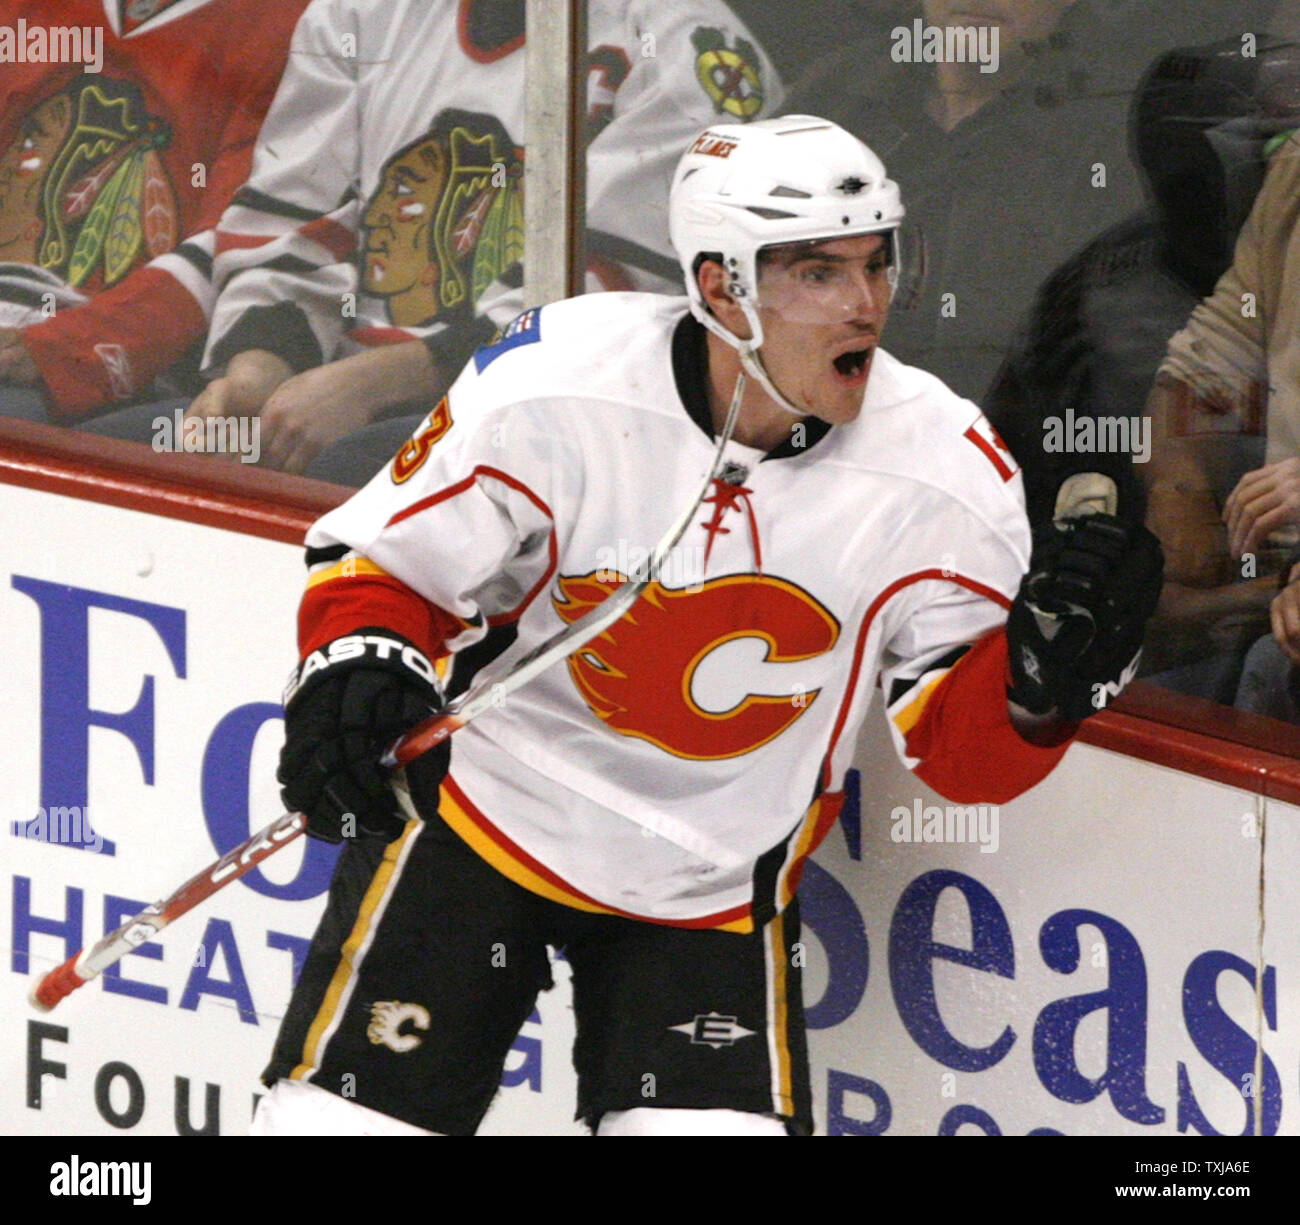 Calgary Flames winger Michael Cammalleri celebrates after scoring during the third period of game 1 of the first round Stanley Cup Playoffs against the Chicago Blackhawks at the United Center in Chicago on April 16, 2009. (UPI Photo/Brian Kersey) Stock Photo